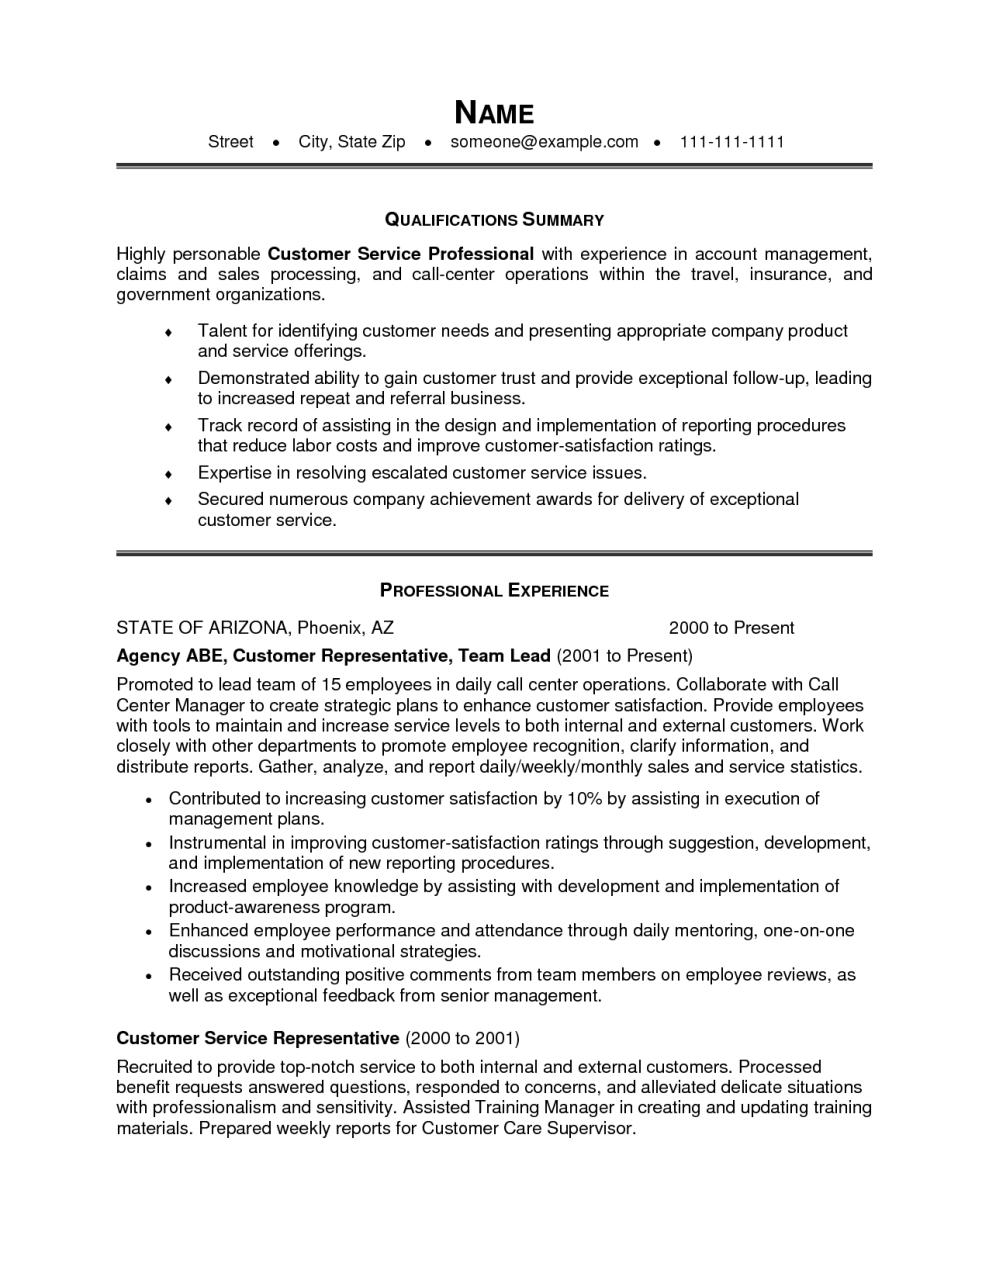 How To Make A Resume With No Experience Reddit